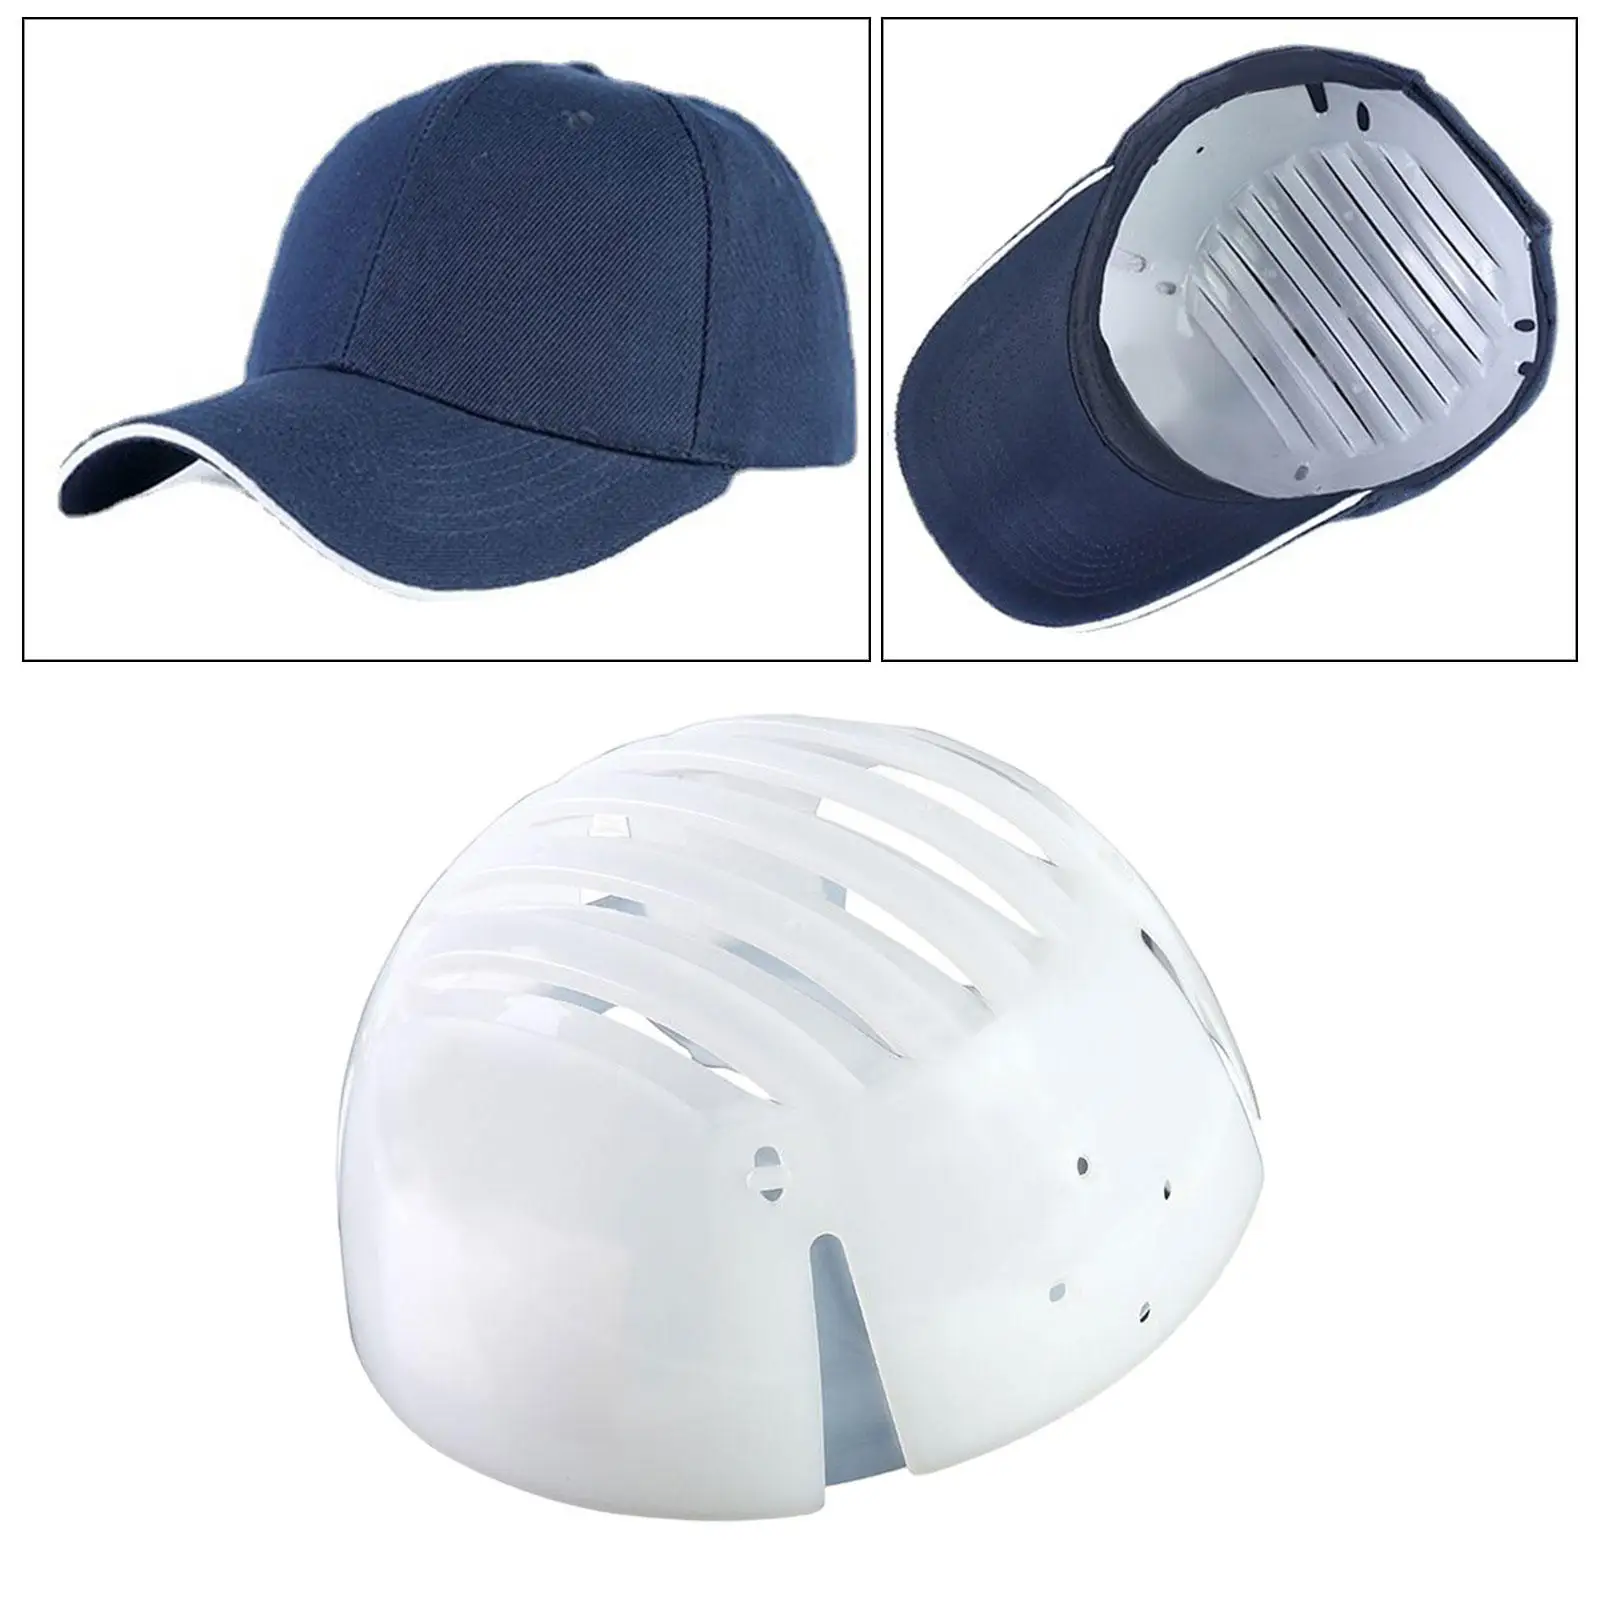 Safety Helmet Protective Hat Lining Durable Bump Cap Insert for Outdoor Baseball Hat